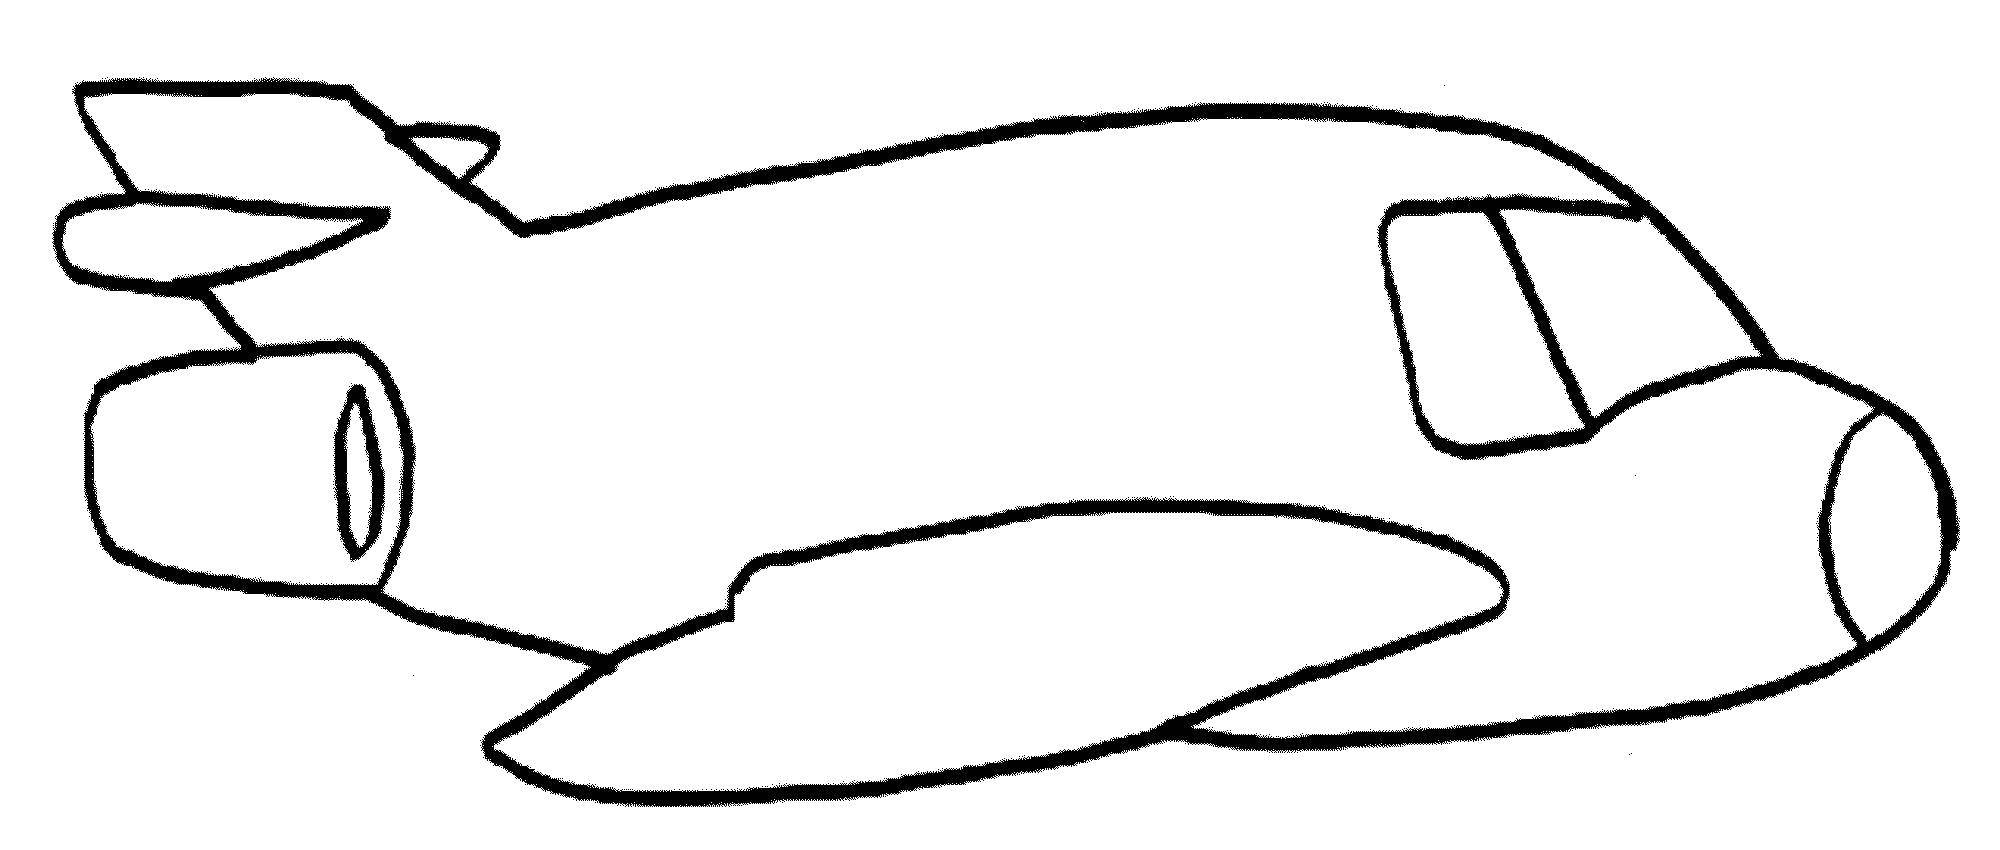 Coloring Airplane. Category Coloring pages for kids. Tags:  Plane.